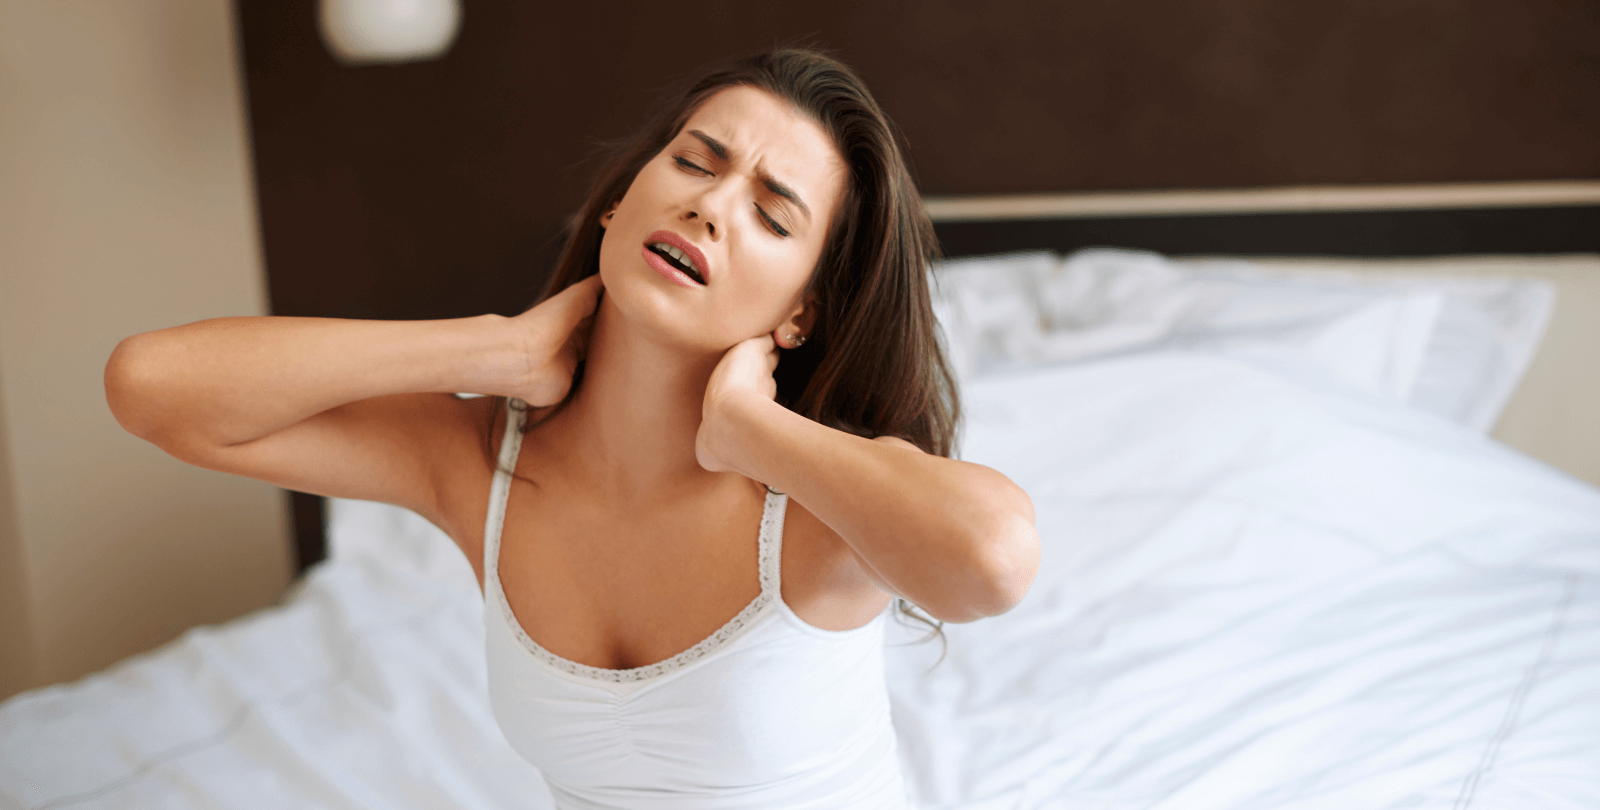 How to Relieve Tension in Neck and Shoulders From Anxiety